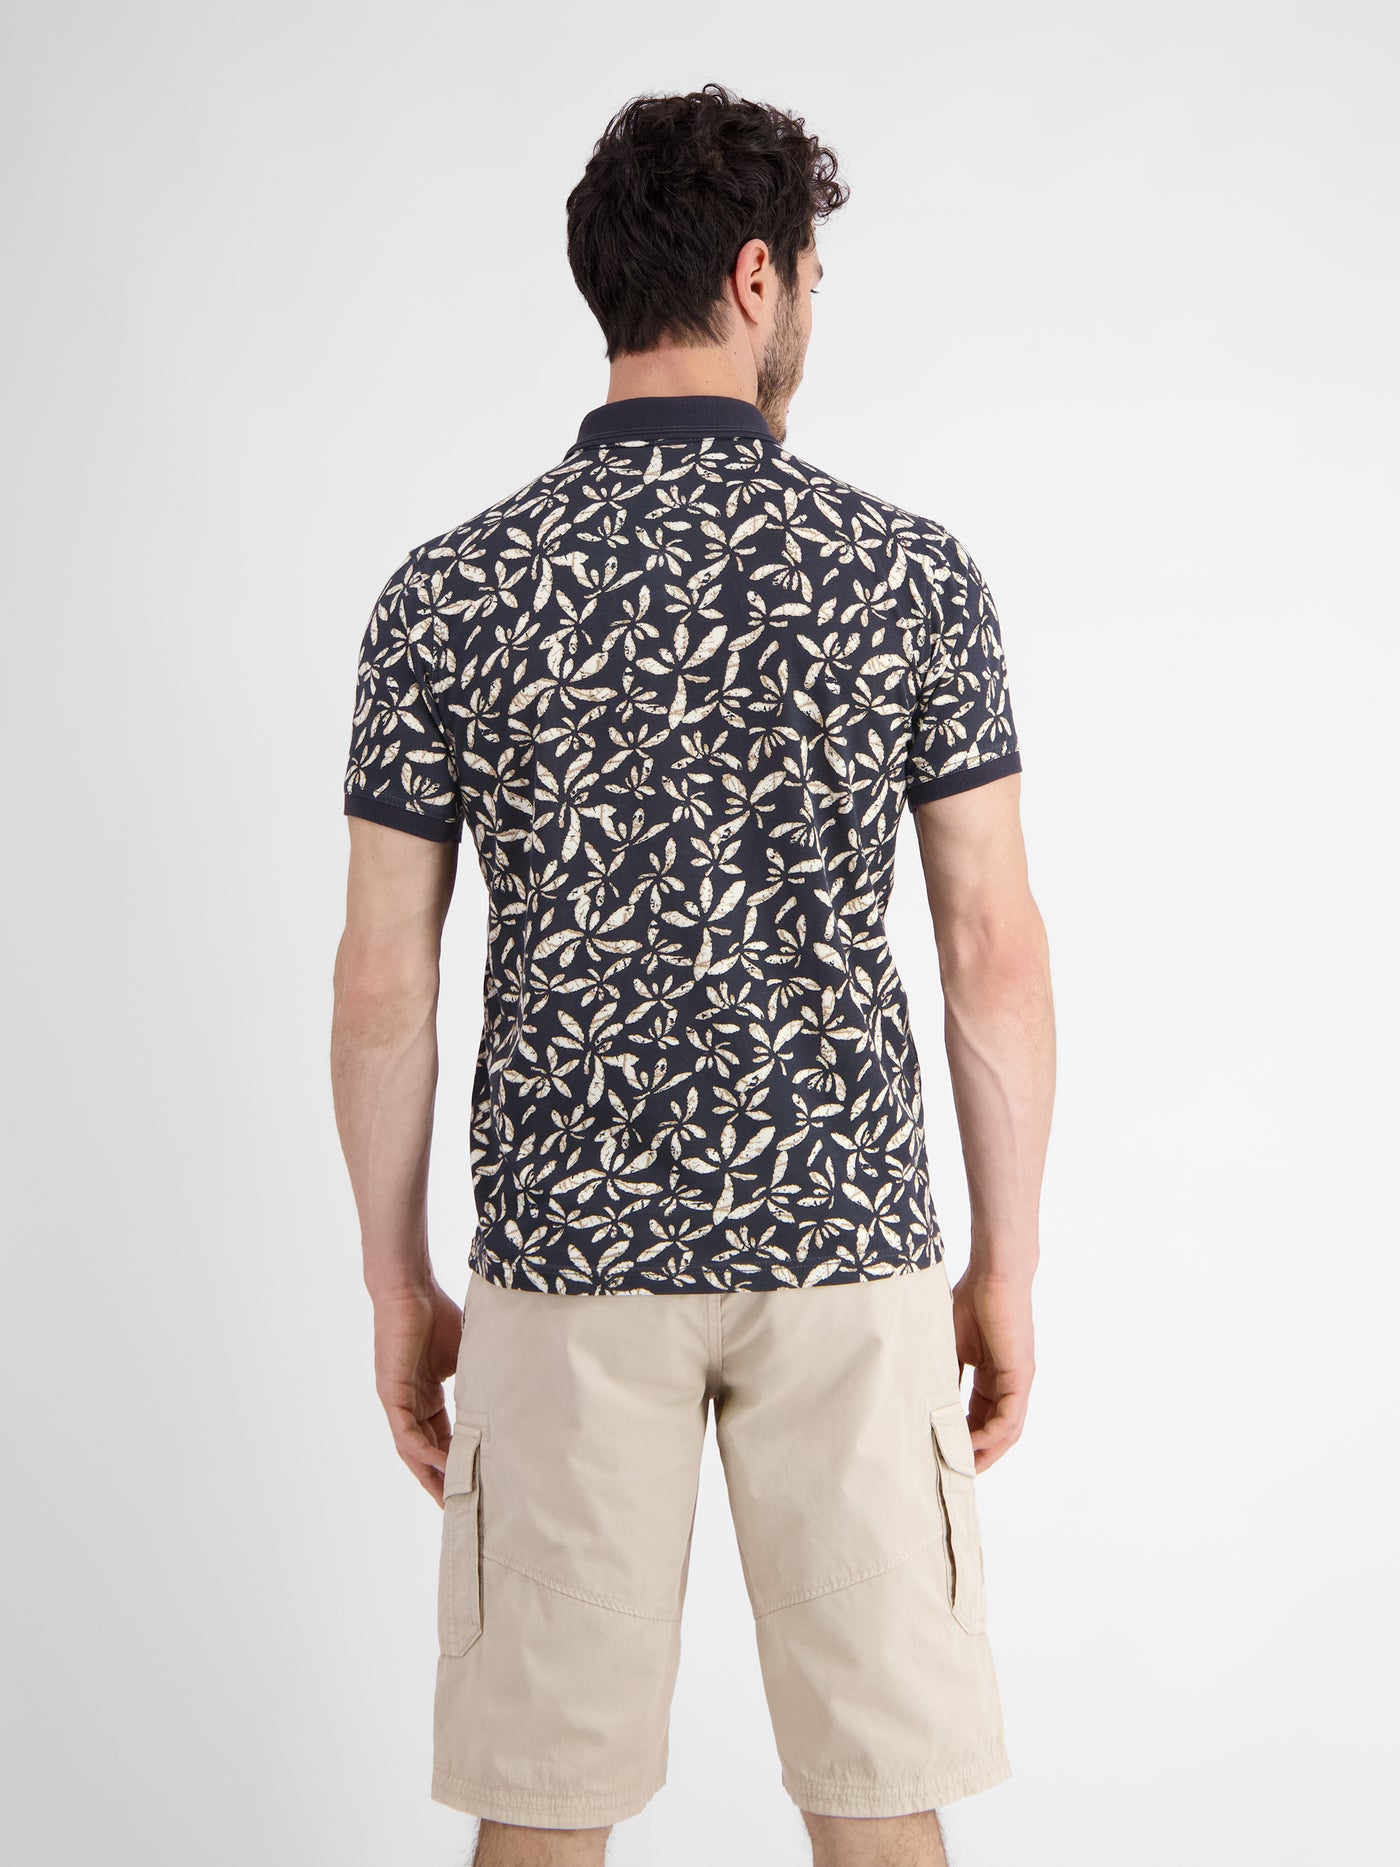 Men's polo shirt with floral all-over print